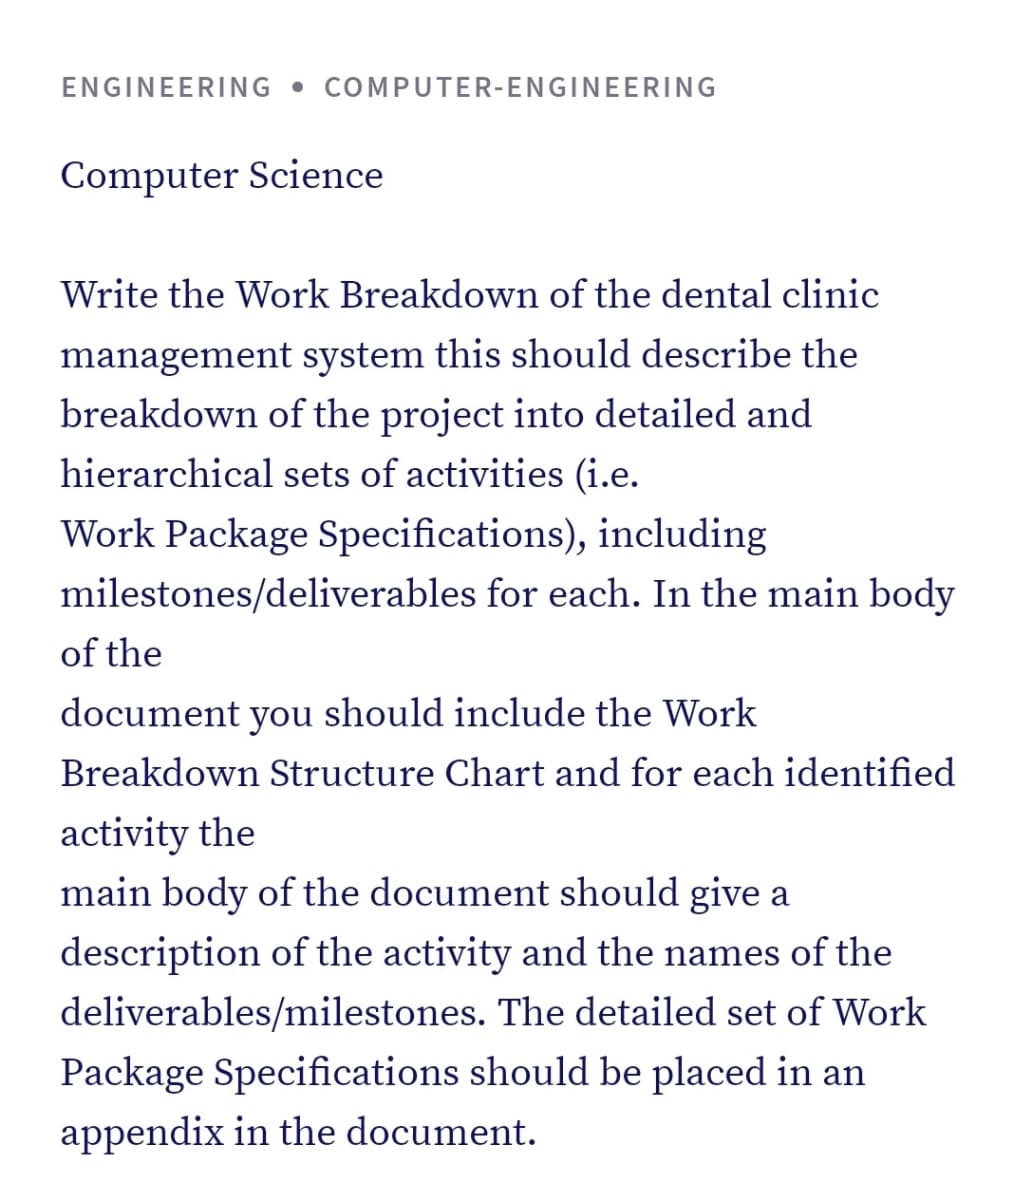 ENGINEERING • COMPUTER-ENGINEERING
Computer Science
Write the Work Breakdown of the dental clinic
management system this should describe the
breakdown of the project into detailed and
hierarchical sets of activities (i.e.
Work Package Specifications), including
milestones/deliverables for each. In the main body
of the
document you should include the Work
Breakdown Structure Chart and for each identified
activity the
main body of the document should give a
description of the activity and the names of the
deliverables/milestones. The detailed set of Work
Package Specifications should be placed in an
appendix in the document.
